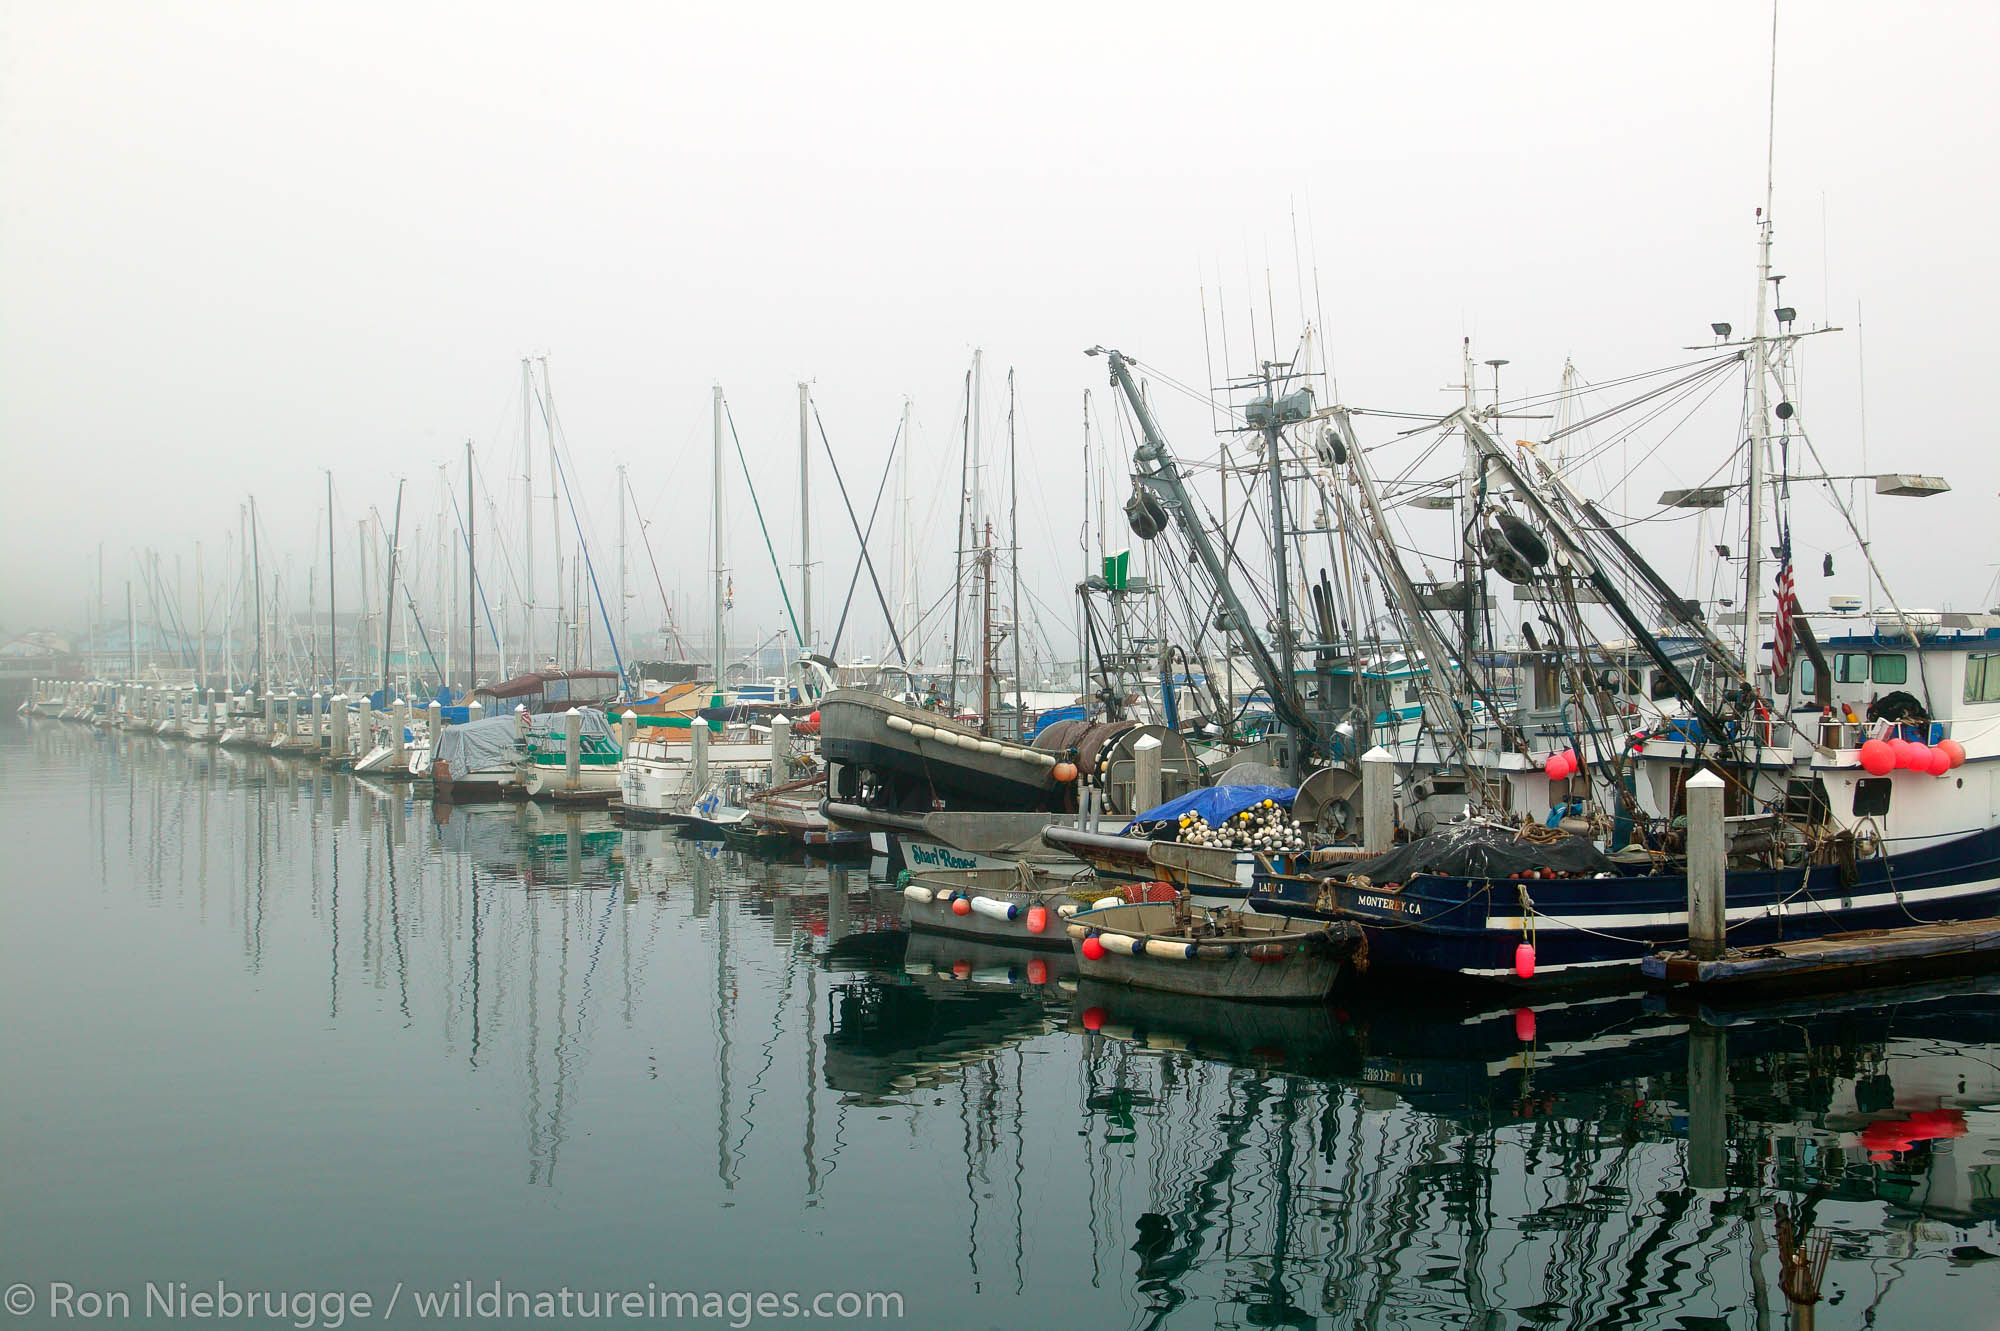 Boats in the Monterey Municipal Marina during a foggy morning, Monterey, California.